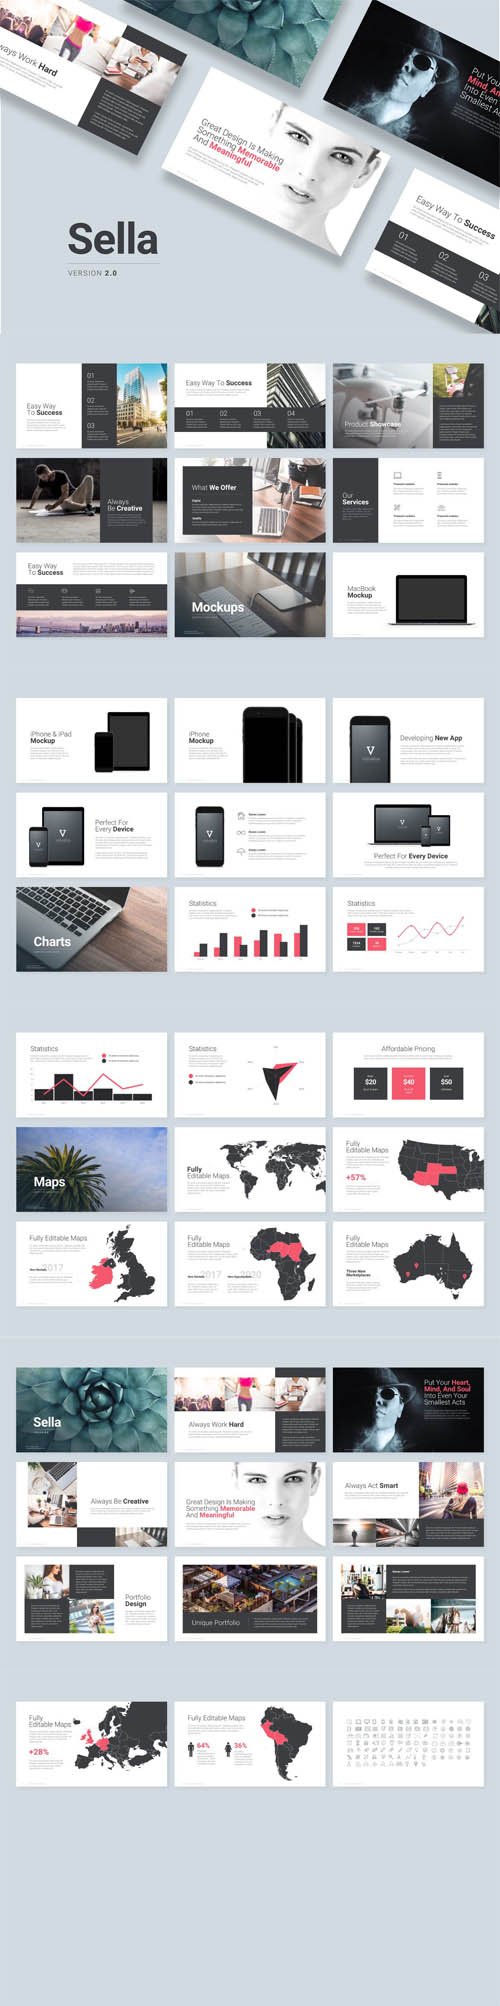 Sella 2.0 Powerpoint Template